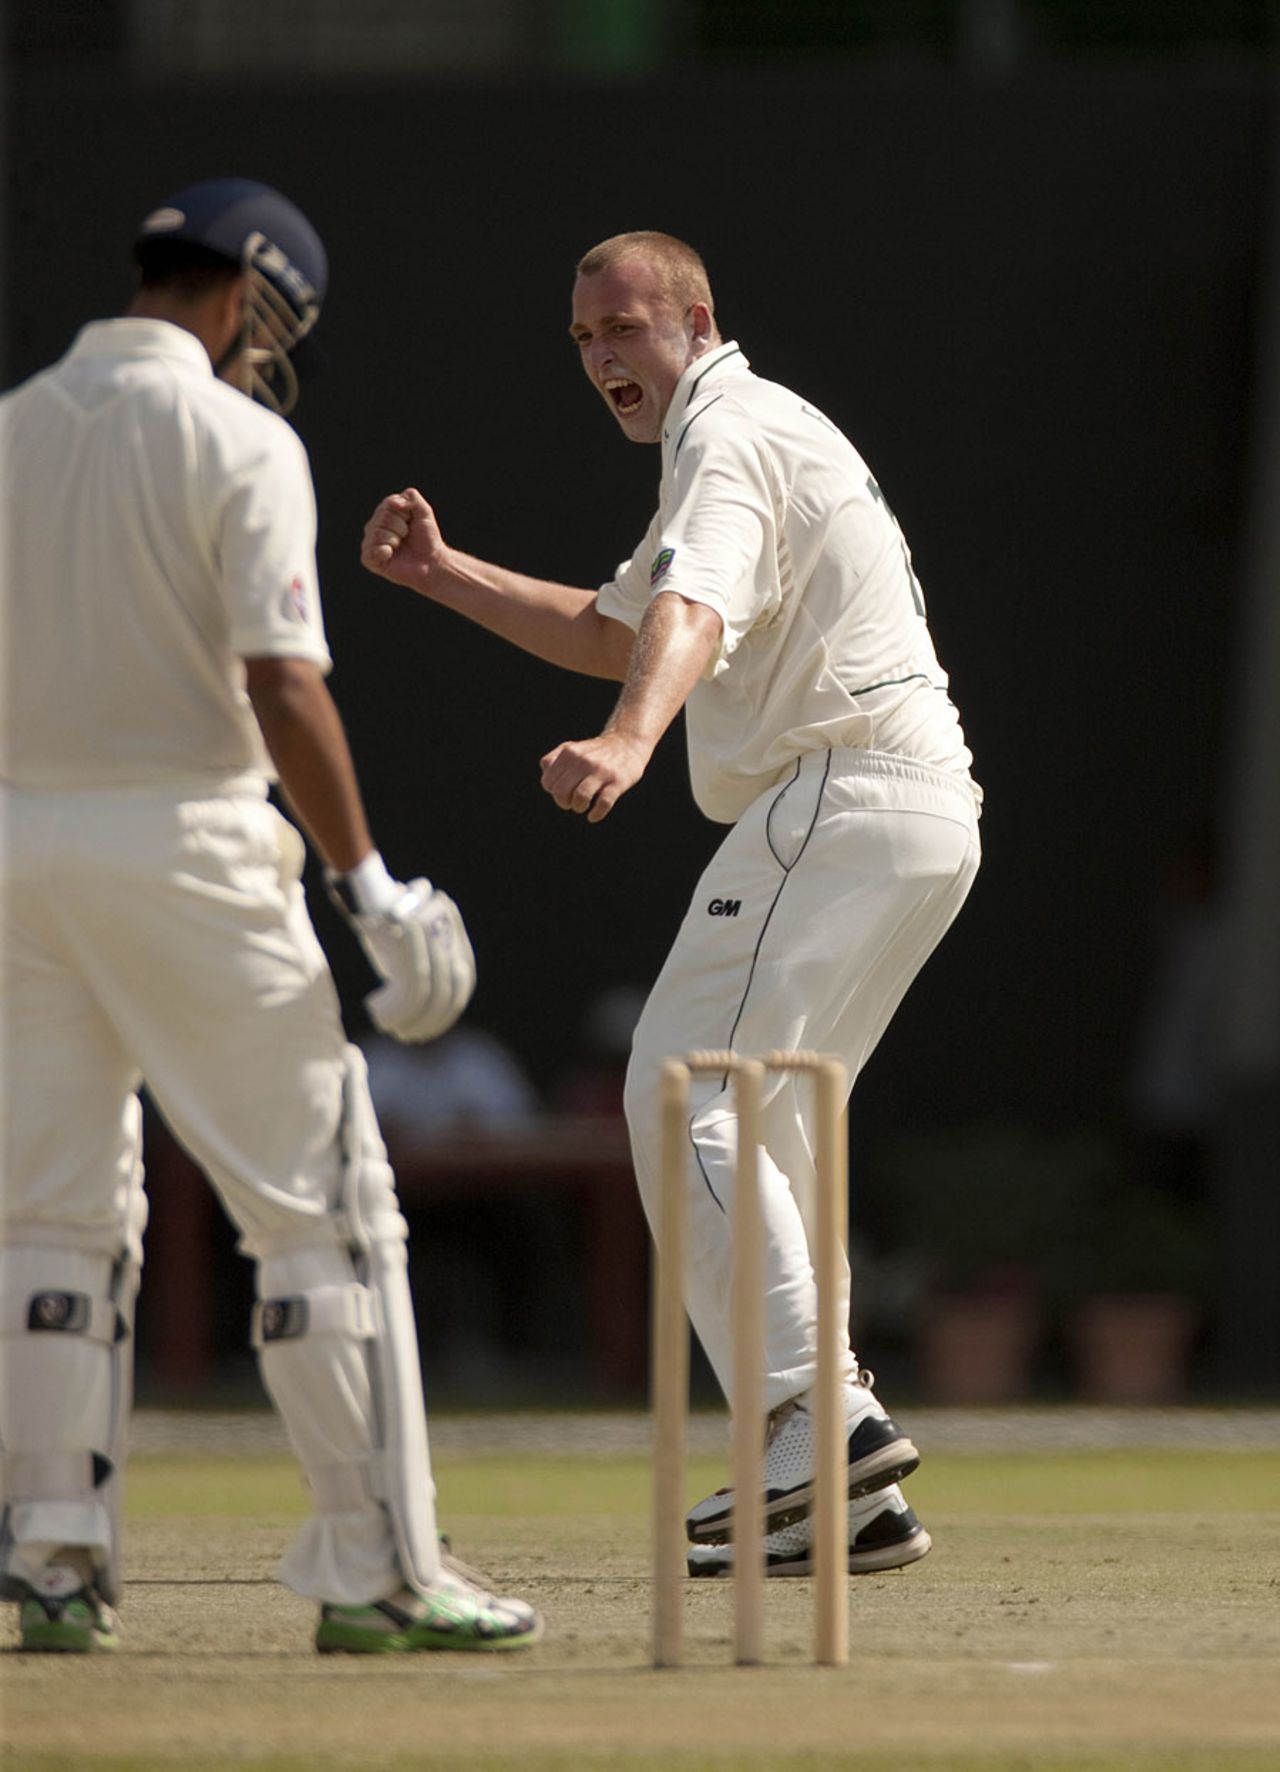 Luke Fletcher celebrates after trapping Rahul Dravid for a second-ball duck, MCC v Nottinghamshire, 1st day, Abu Dhabi, March 27, 2011